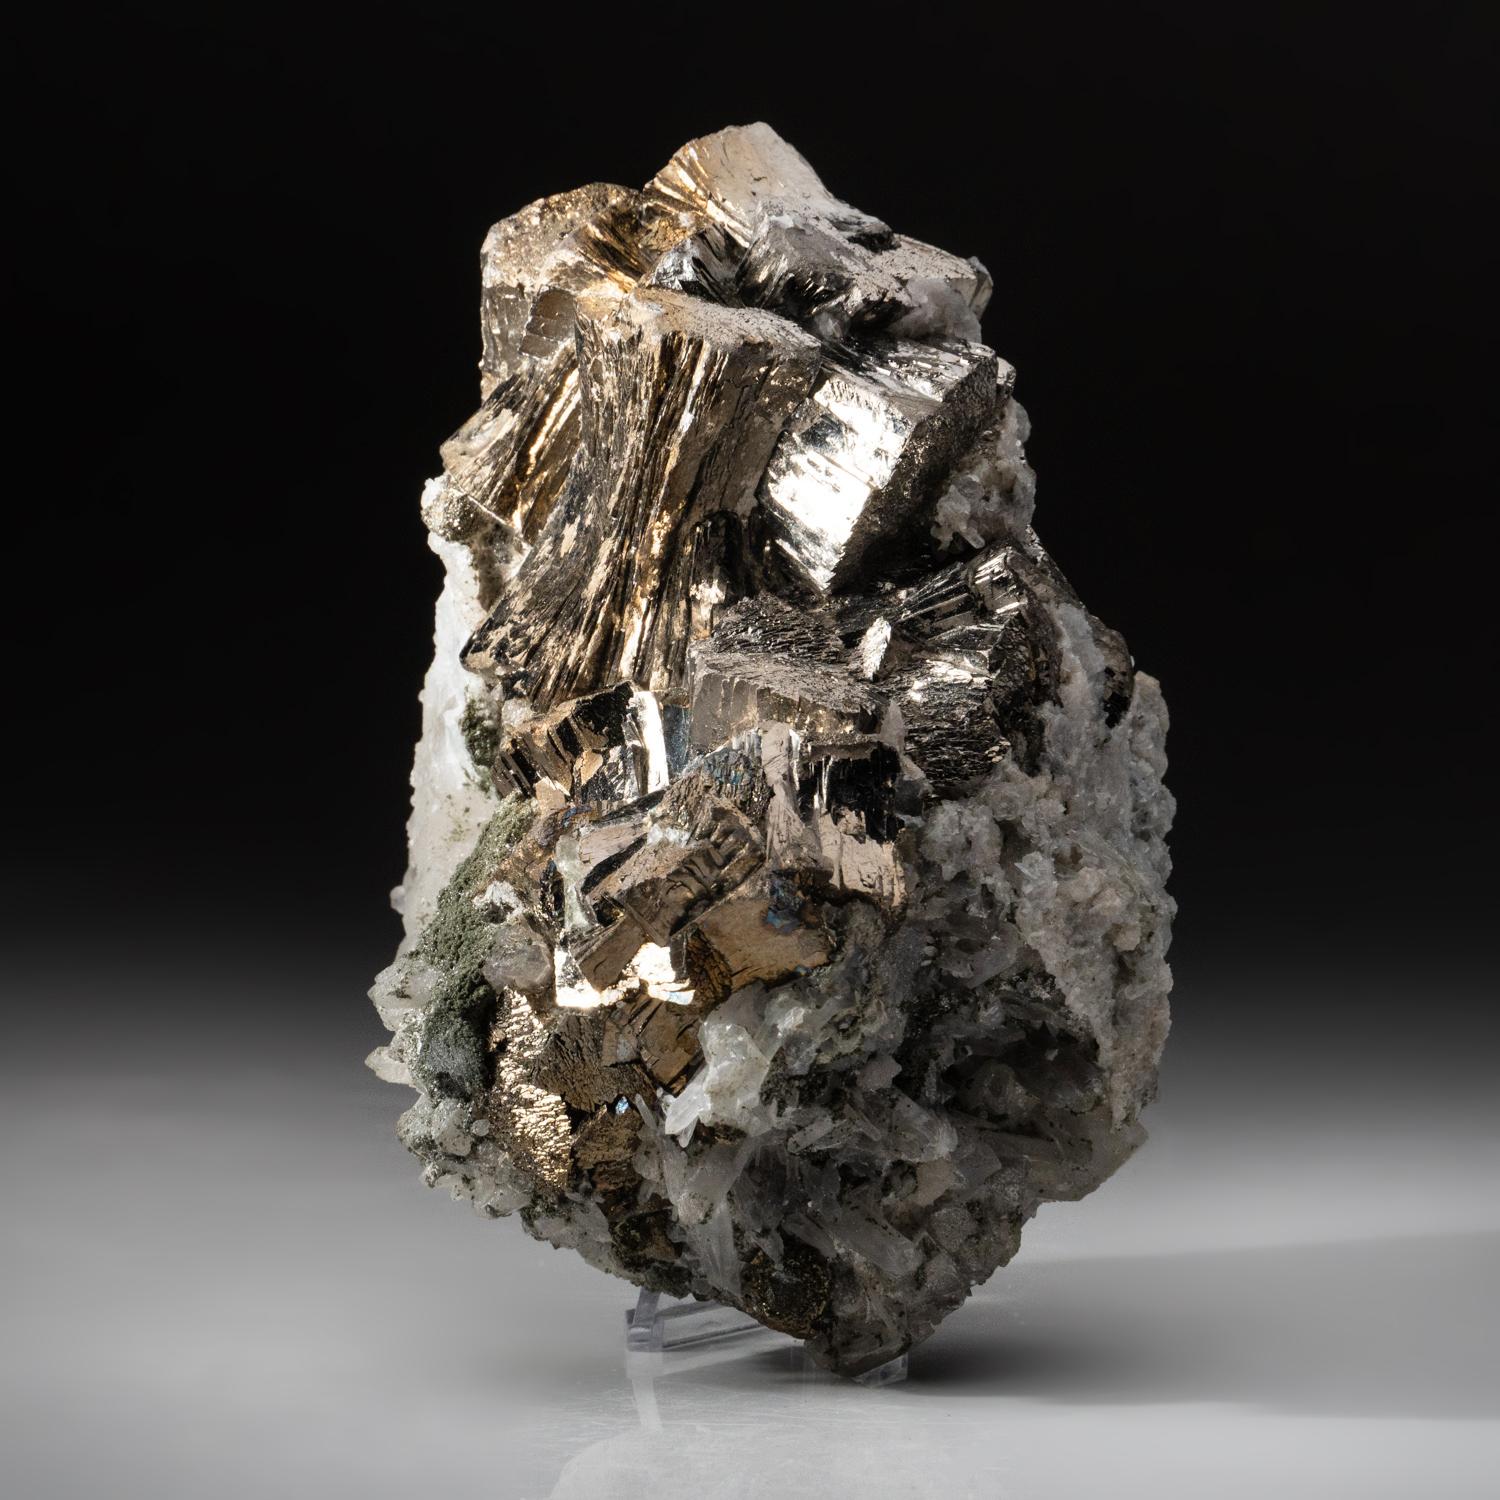 From Huanggang Mine, Kèshíkèténg Qí, Chifeng, Inner Mongolia, China Large specimen of silvery metallic luster arsenopyrite crystals in a subparallel growth formation on gossan matrix with quartz. This piece features a rare combination of